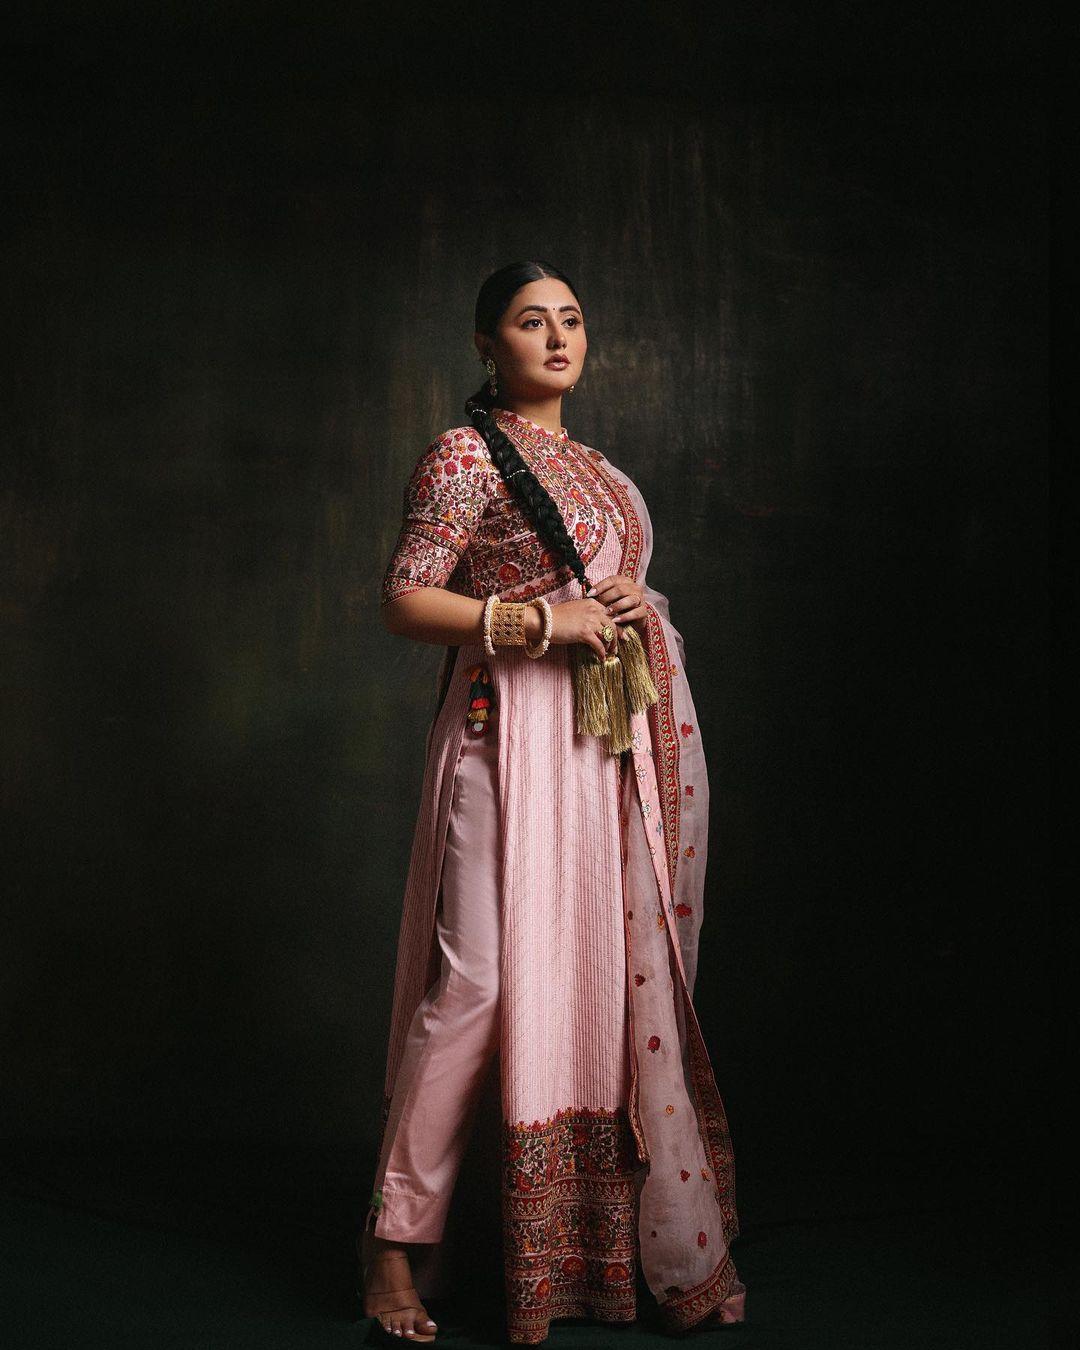 In this stunning traditional appearance, Rashami Desai captivates in a pink kurta paired with matching pants and dupatta